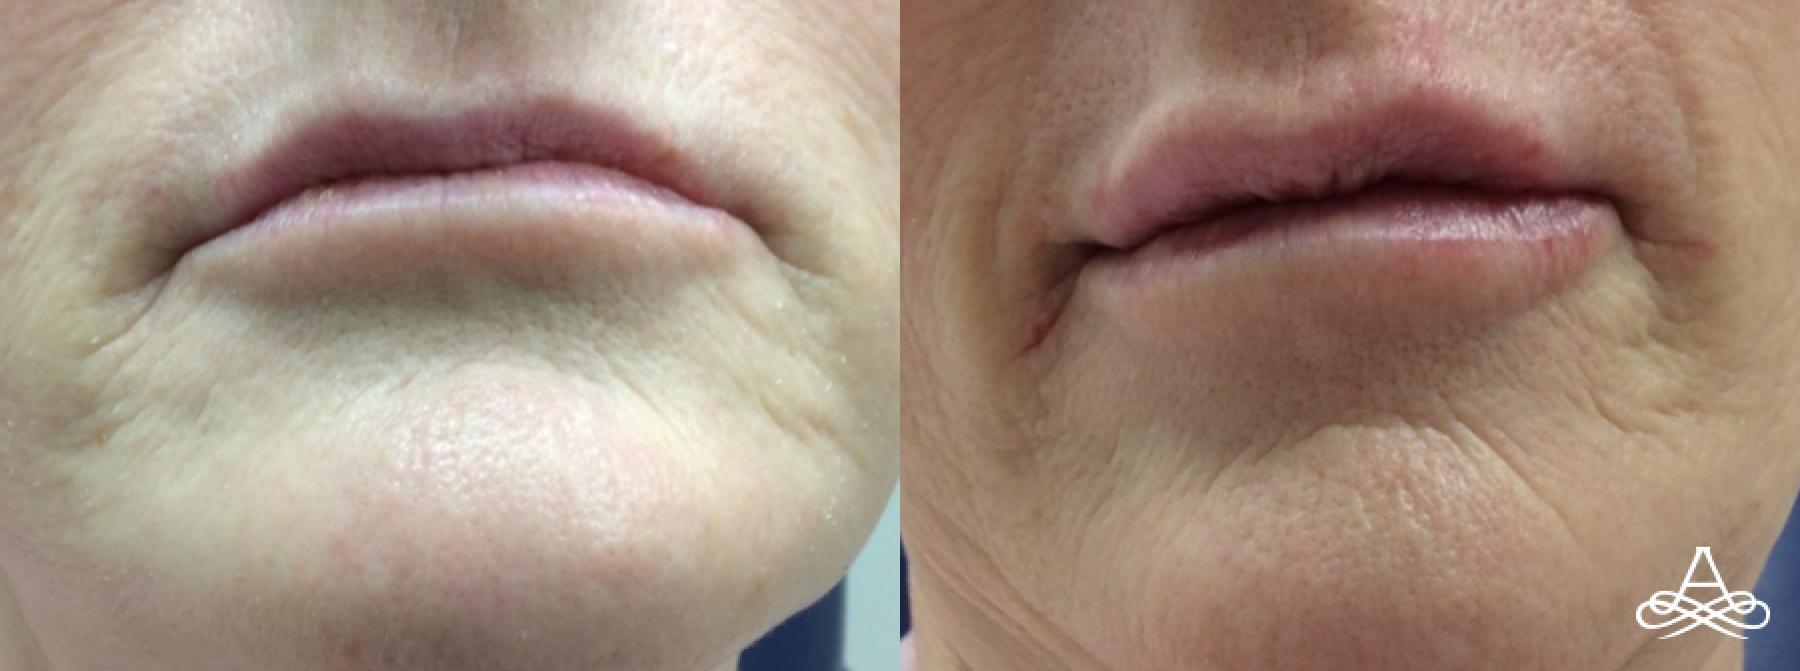 Lip Filler: Patient 10 - Before and After 1